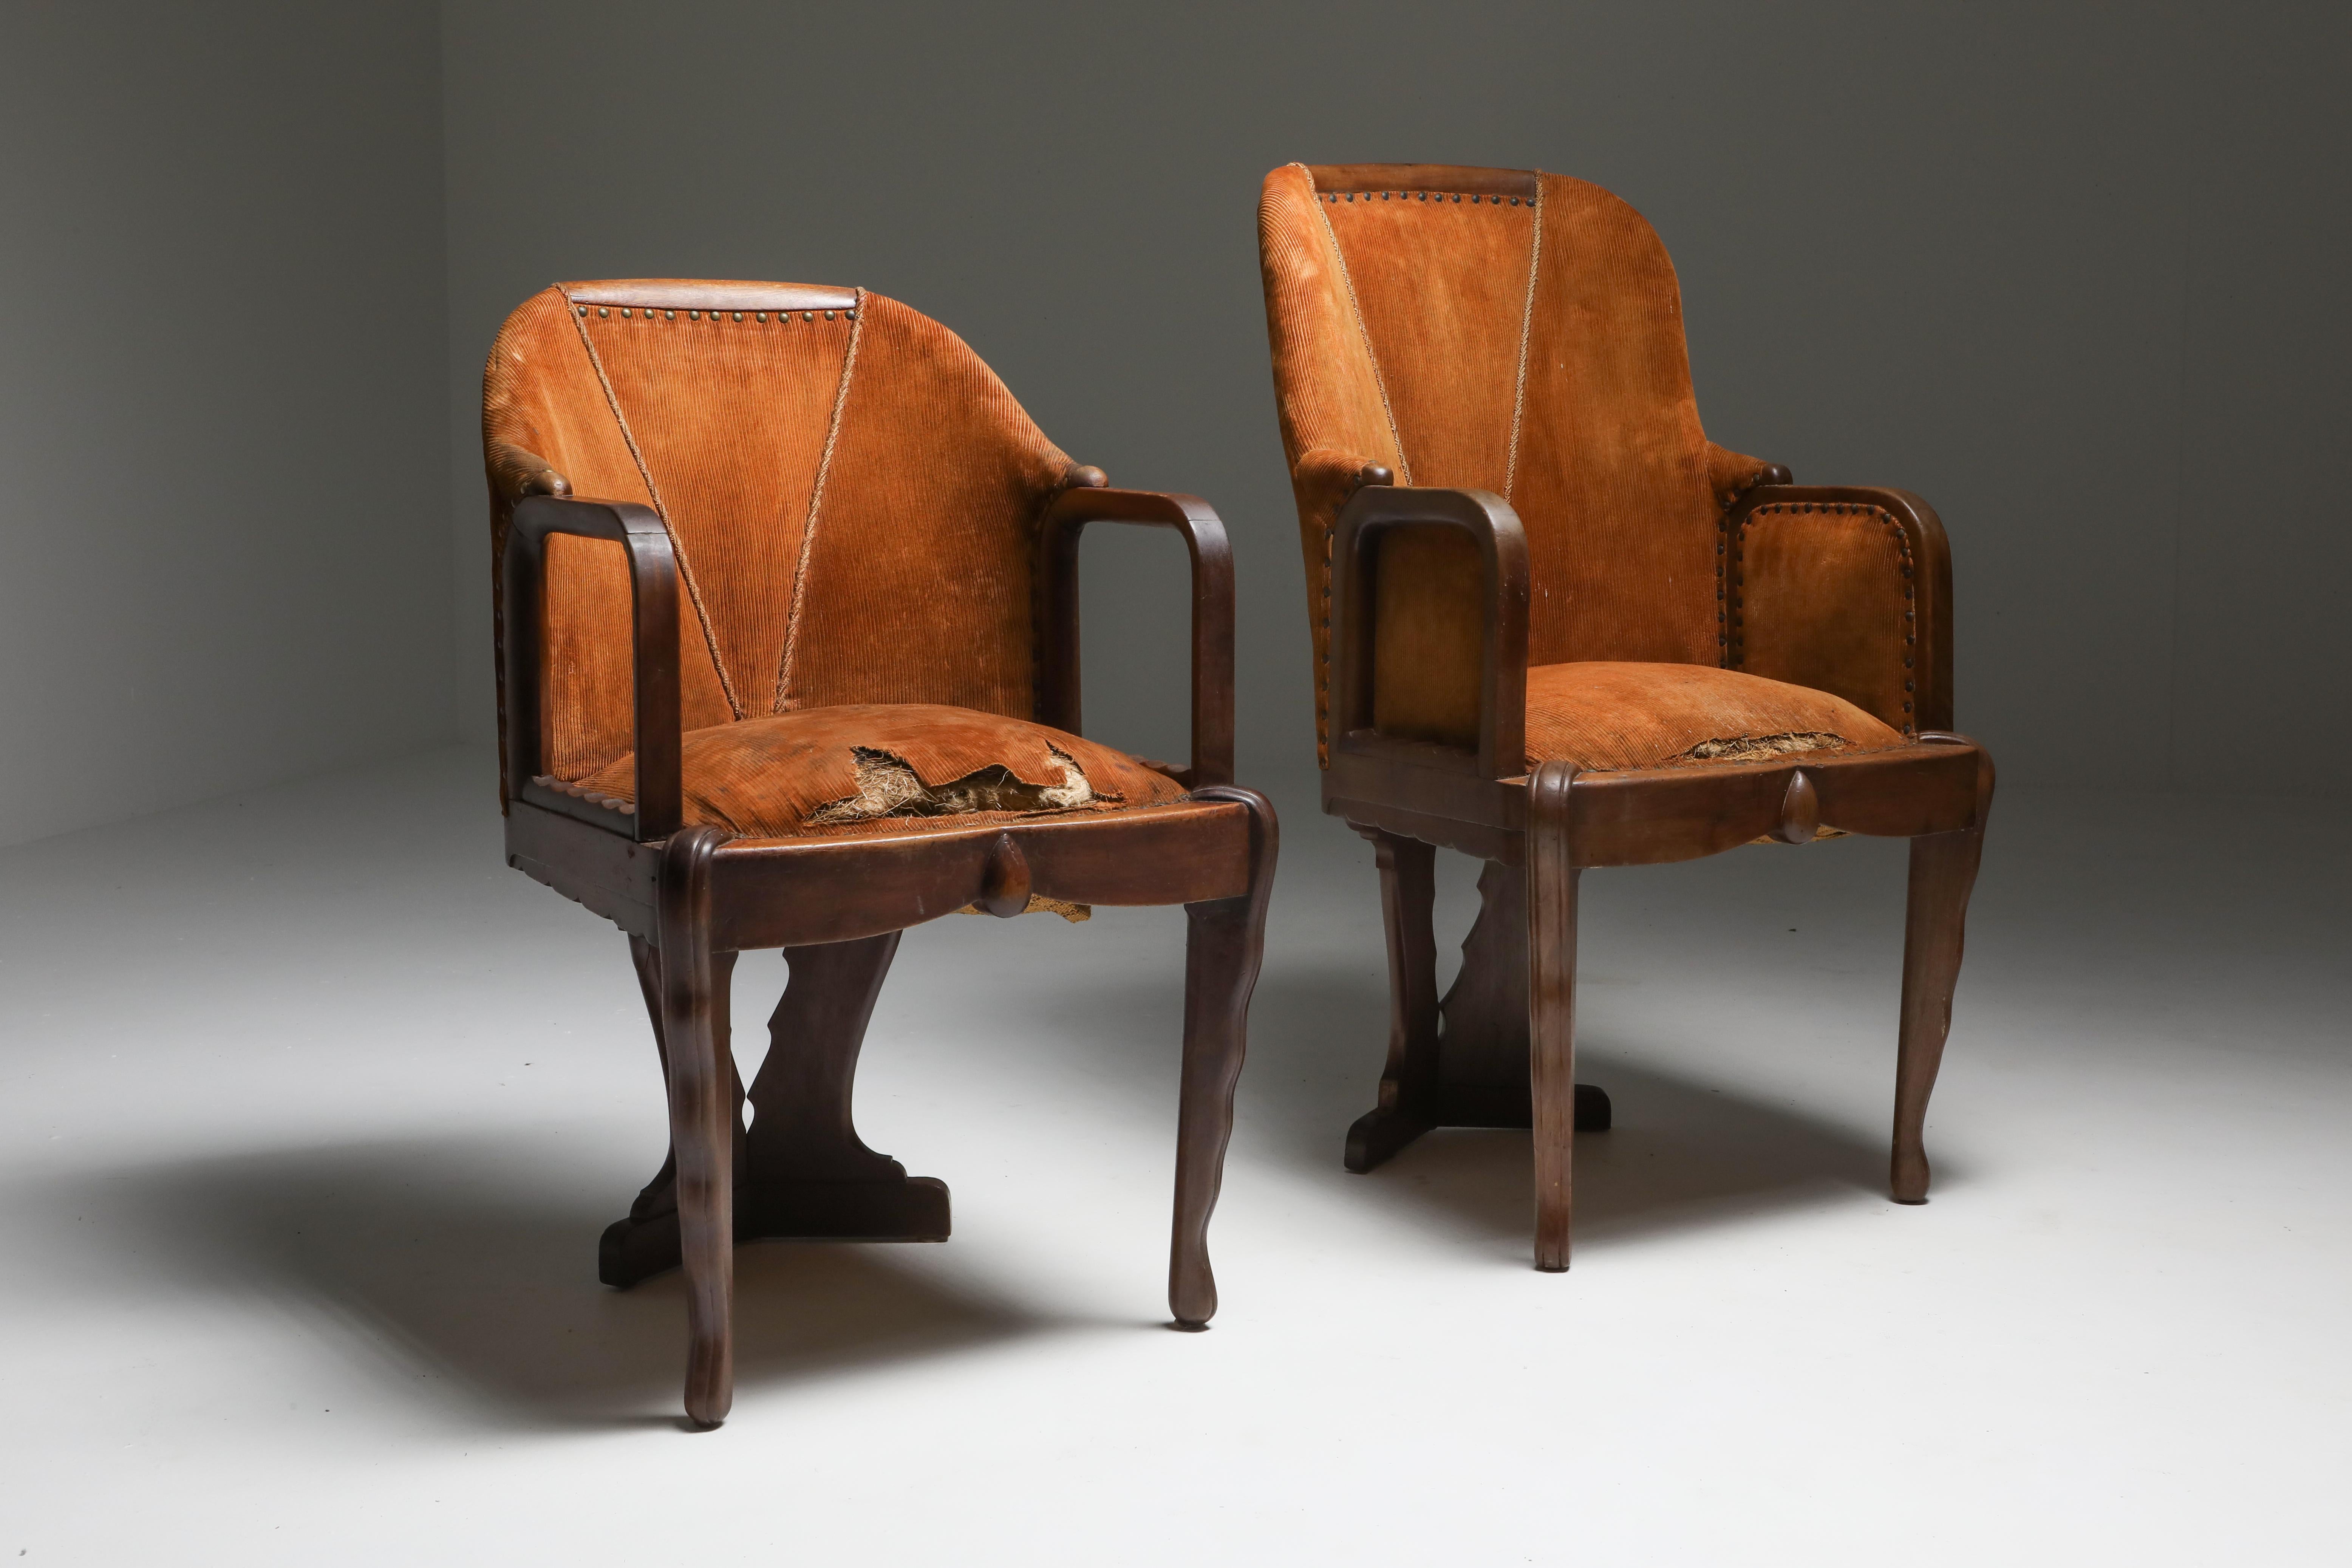 Amsterdam School chair by 't Woonhuys

't Woonhuys Amsterdam; famous for the Michel De Klerk furniture
Provenance: Private collection , The Netherlands, 1920s

we can reupholster in a fabric of choice

The Amsterdam School (Dutch: Amsterdamse